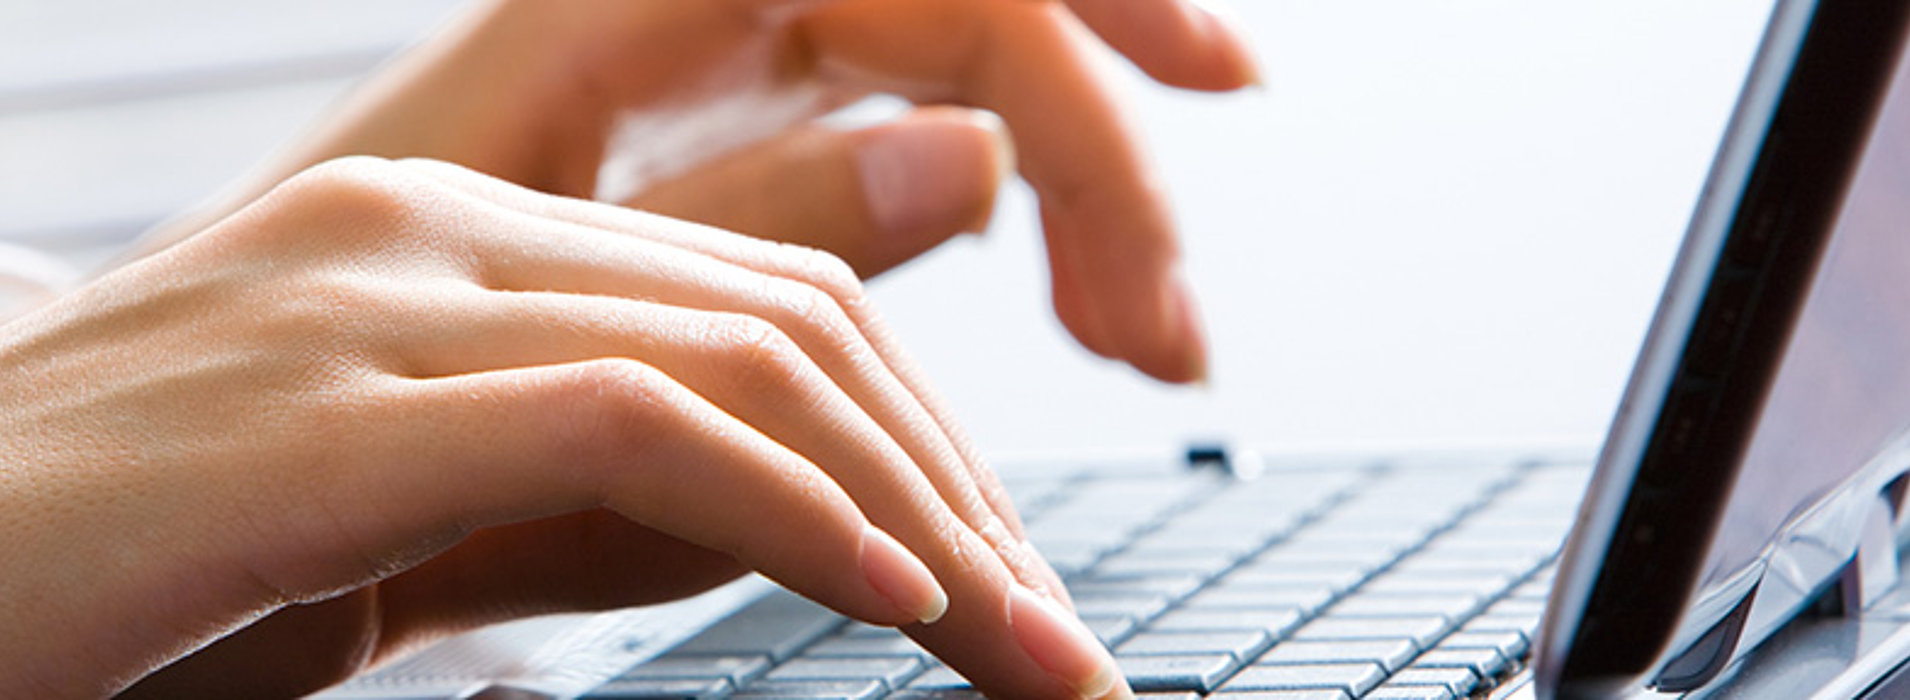 Close-up of Hands typing on a Laptop Keyboard